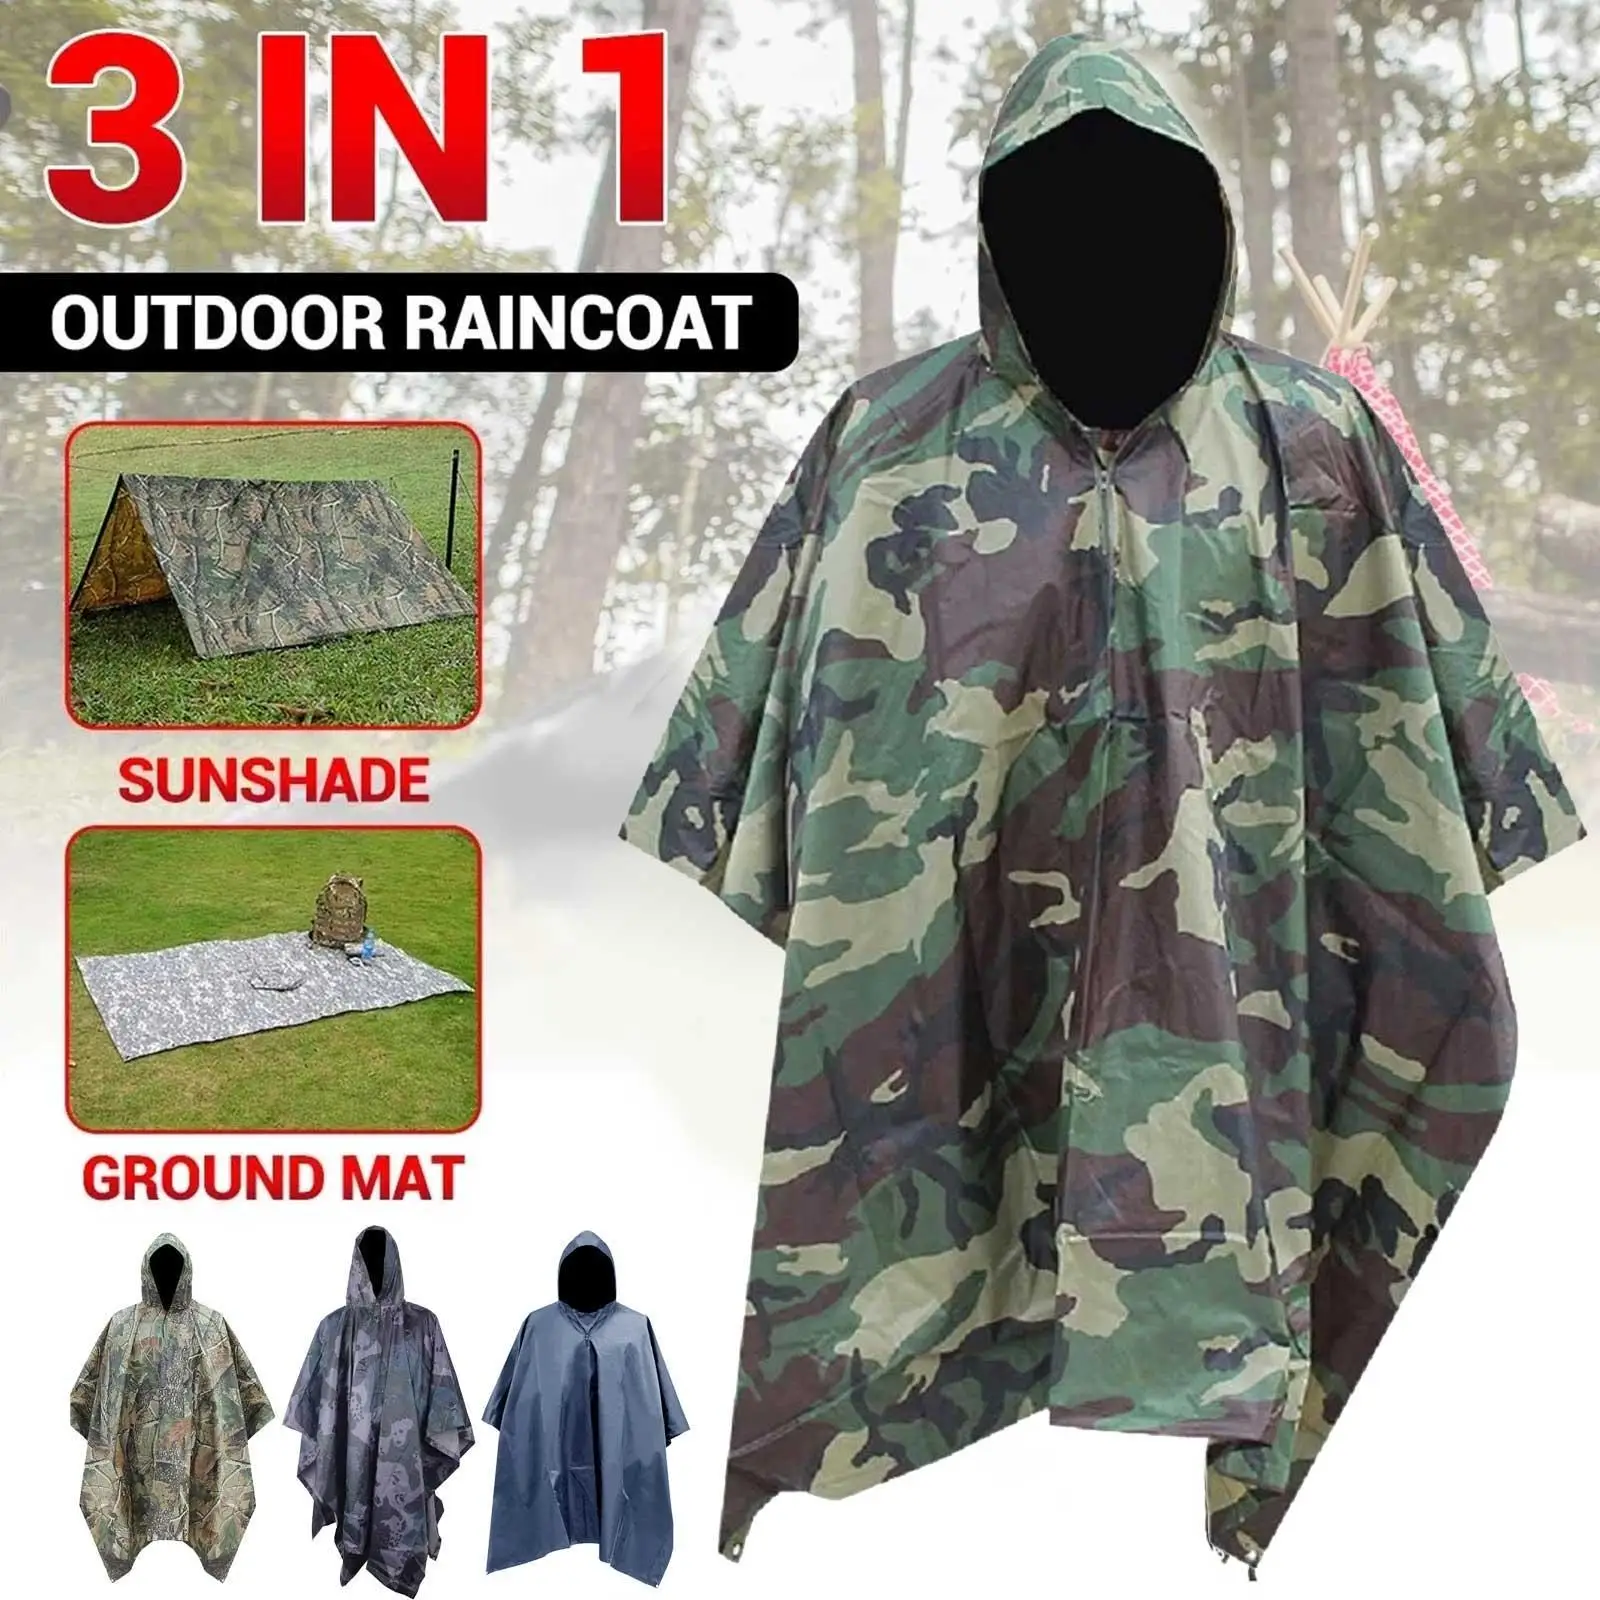 

Adult Men's Fashion Outdoor Hiking Mountaineering Multifunctional Three-in-One Camouflage Raincoat Cloak Cape Cloak Polyester